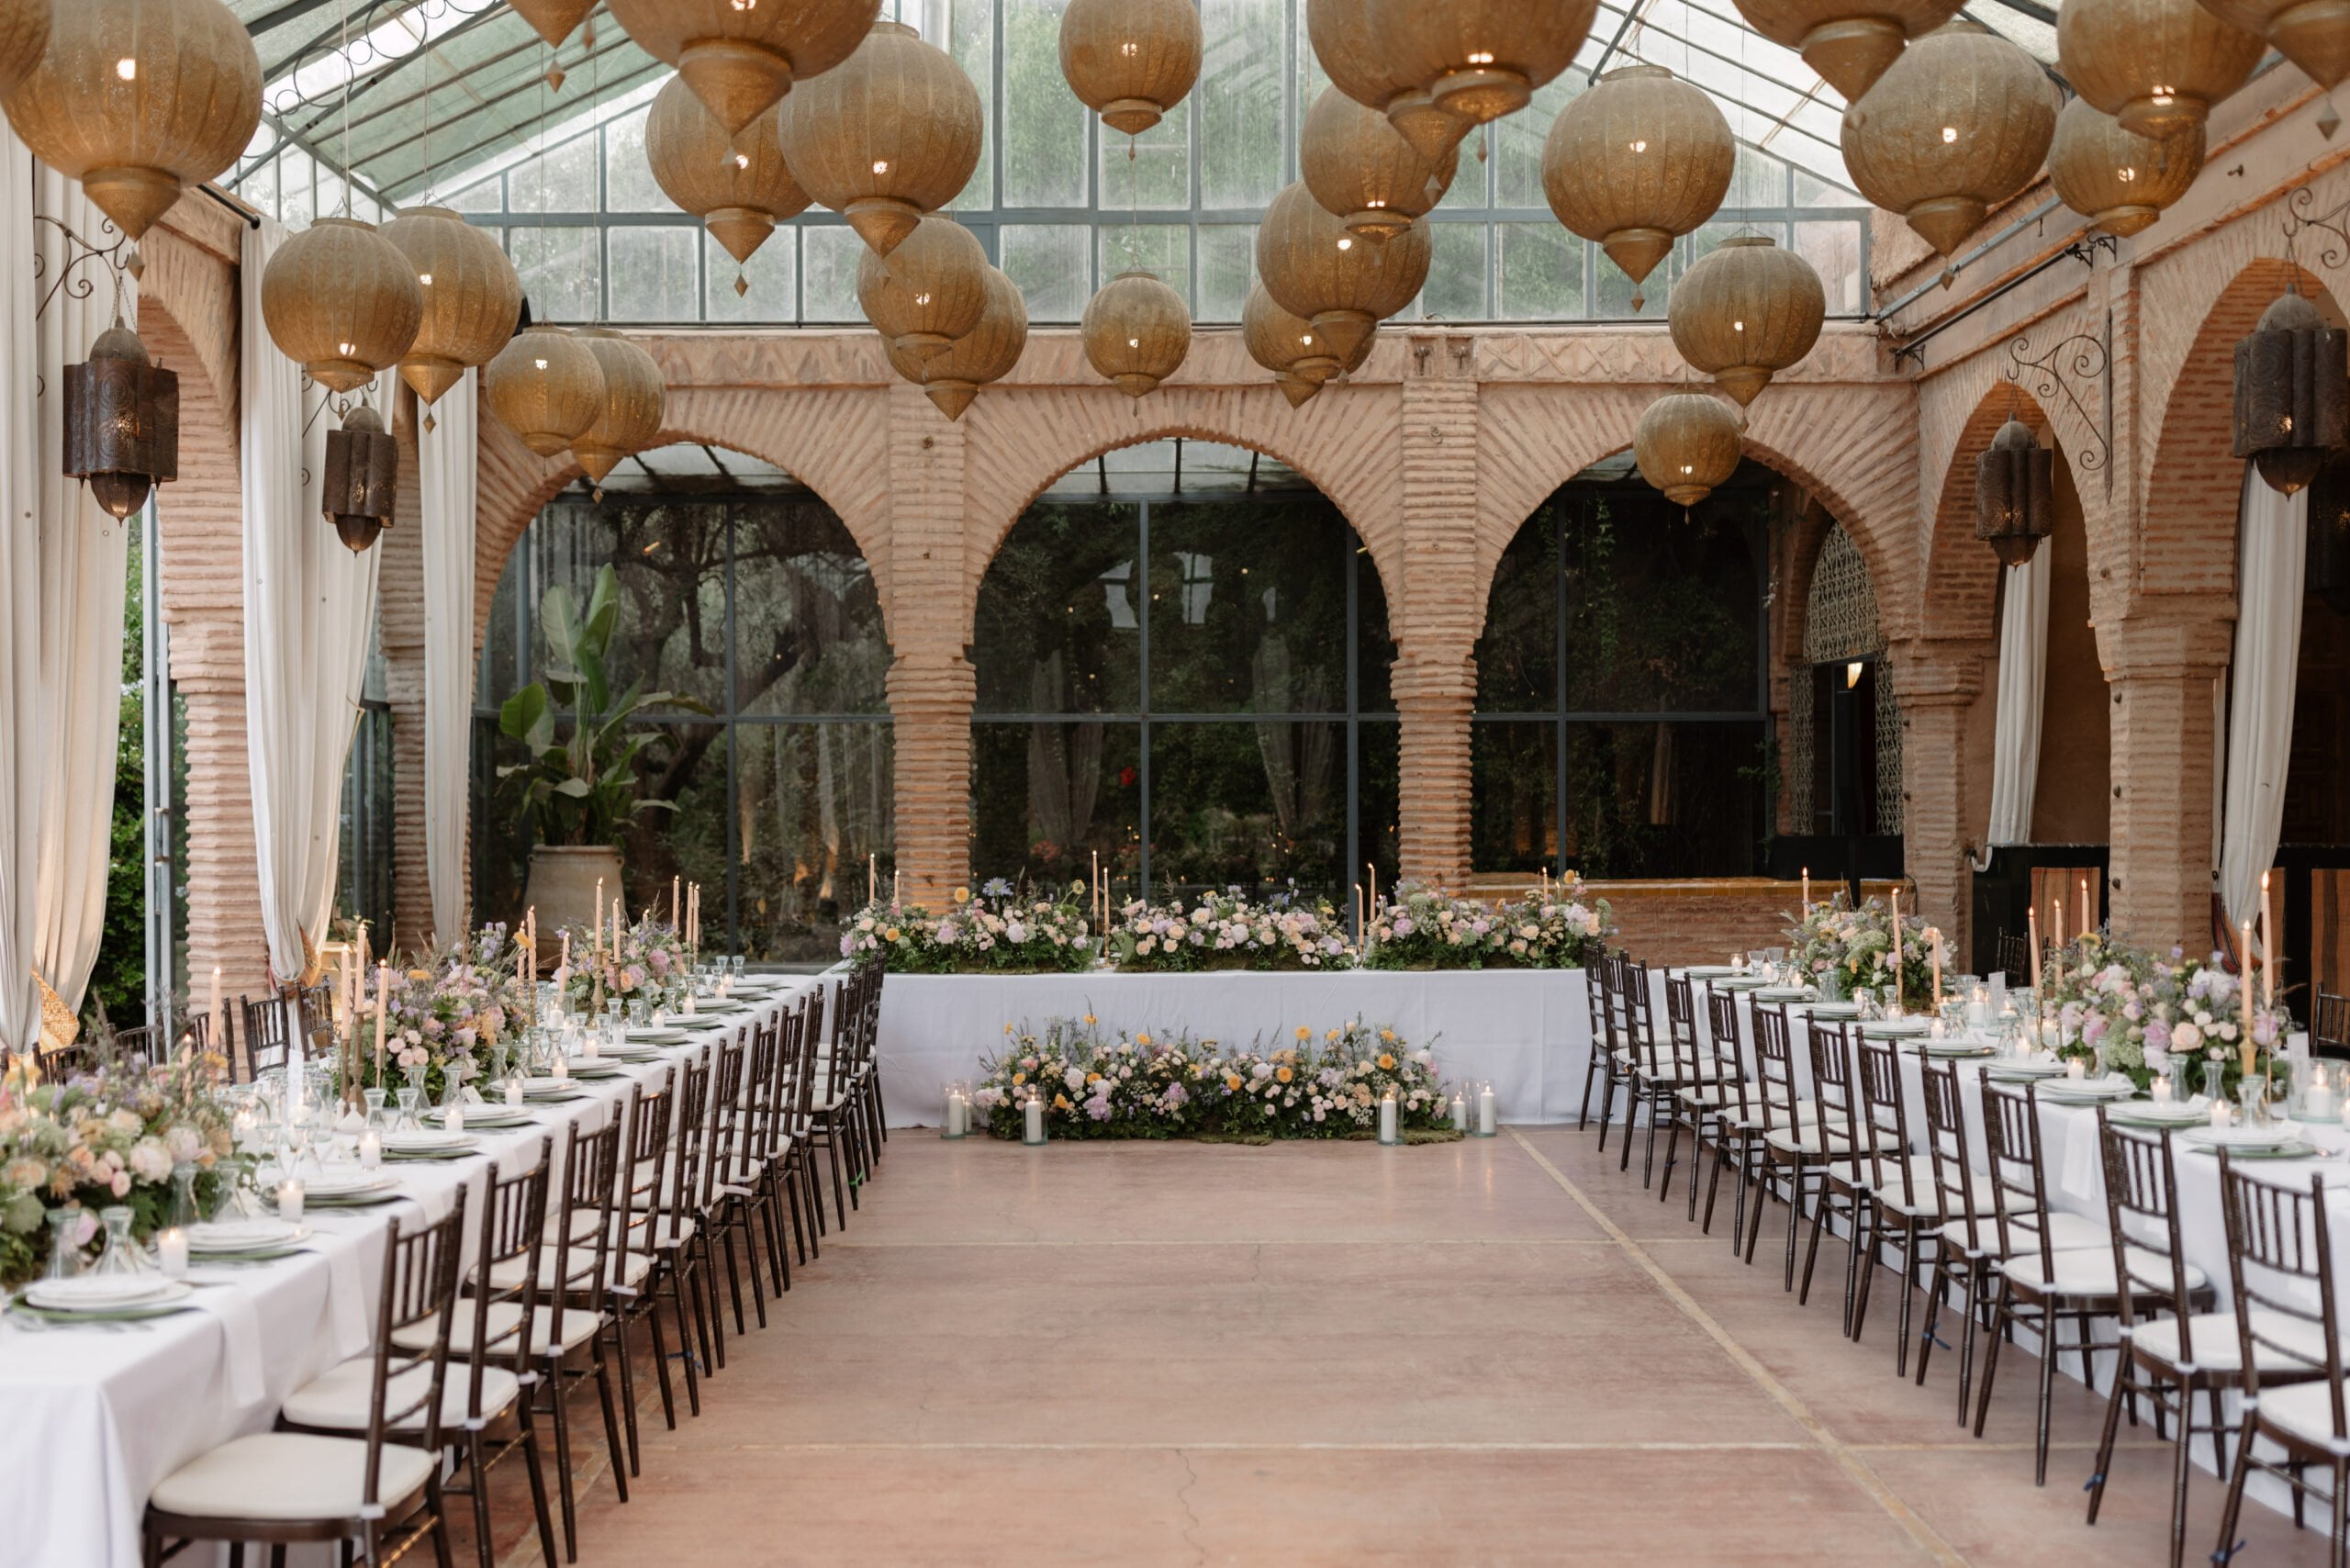 Reception space at Beldi Country Club wedding in Marrakech